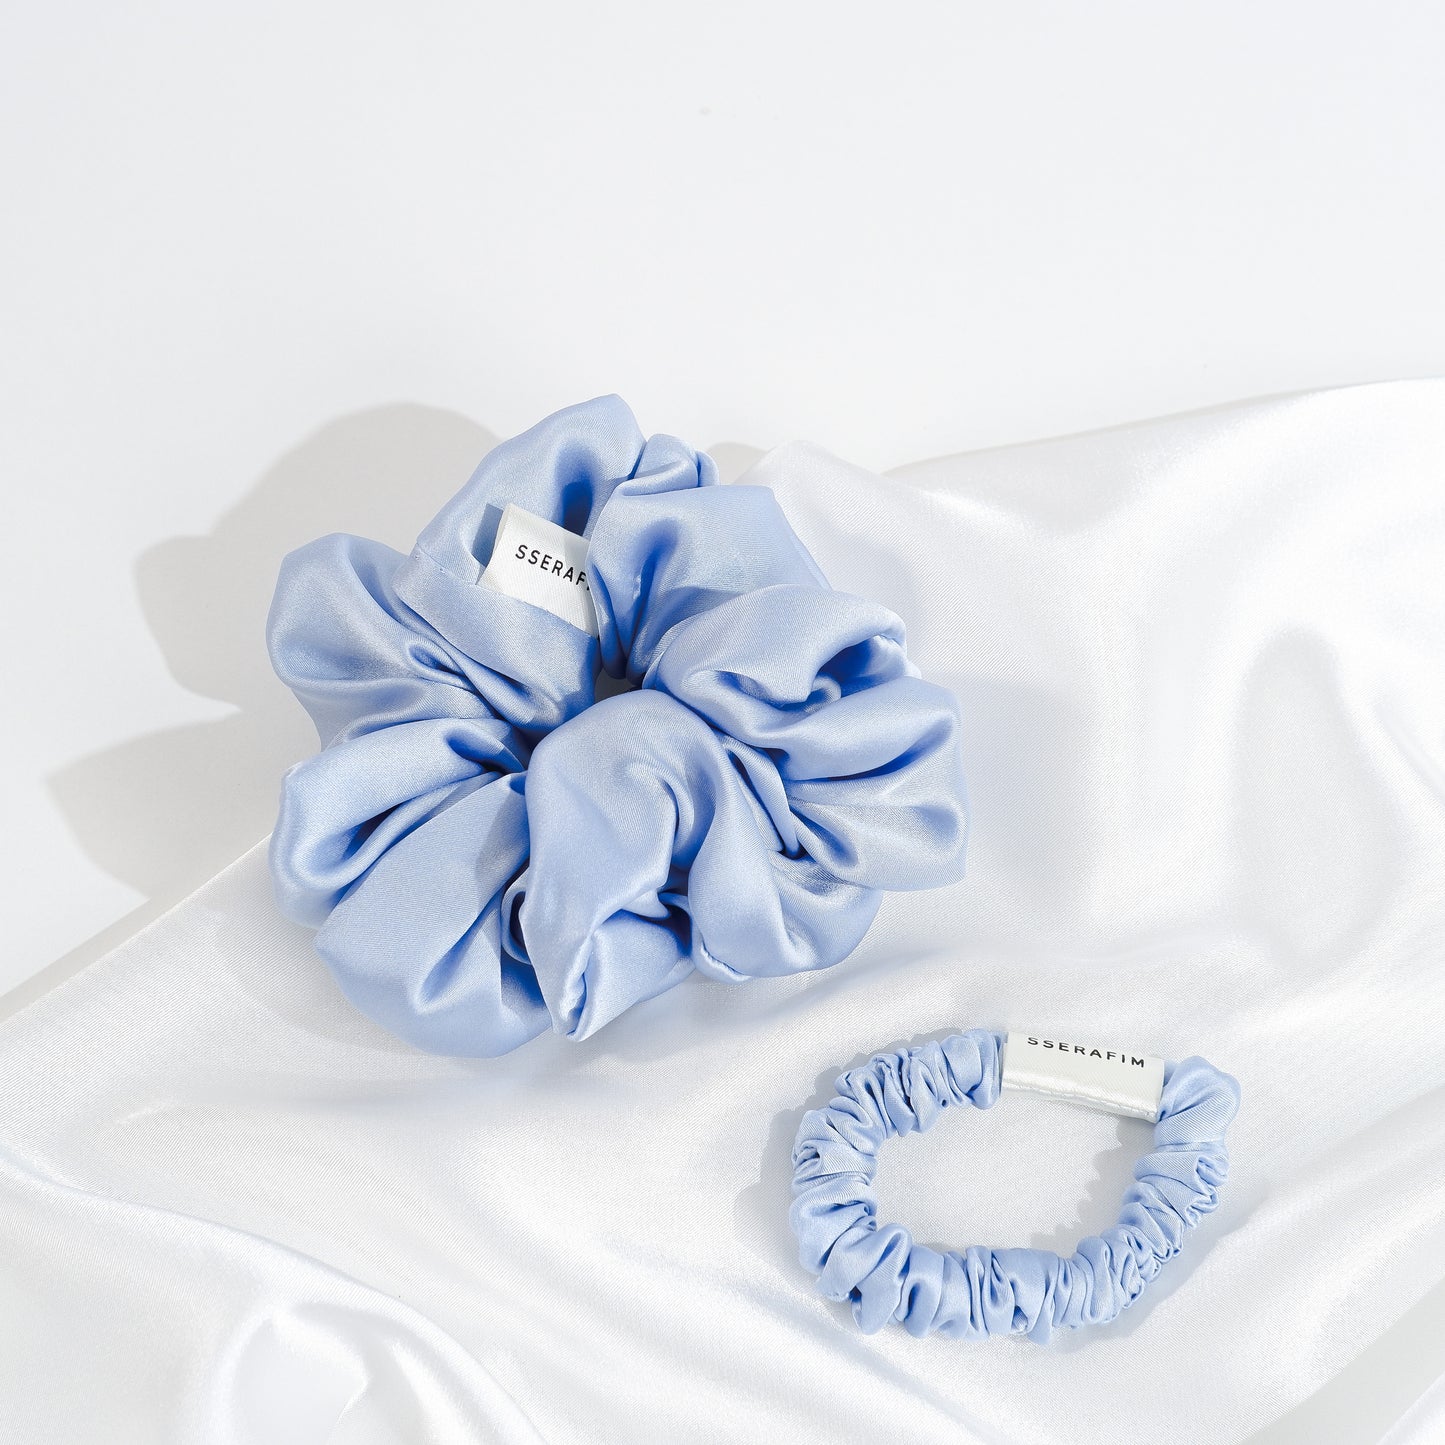 duo large and skinny size silk scrunchies- blue color - front by sserafim